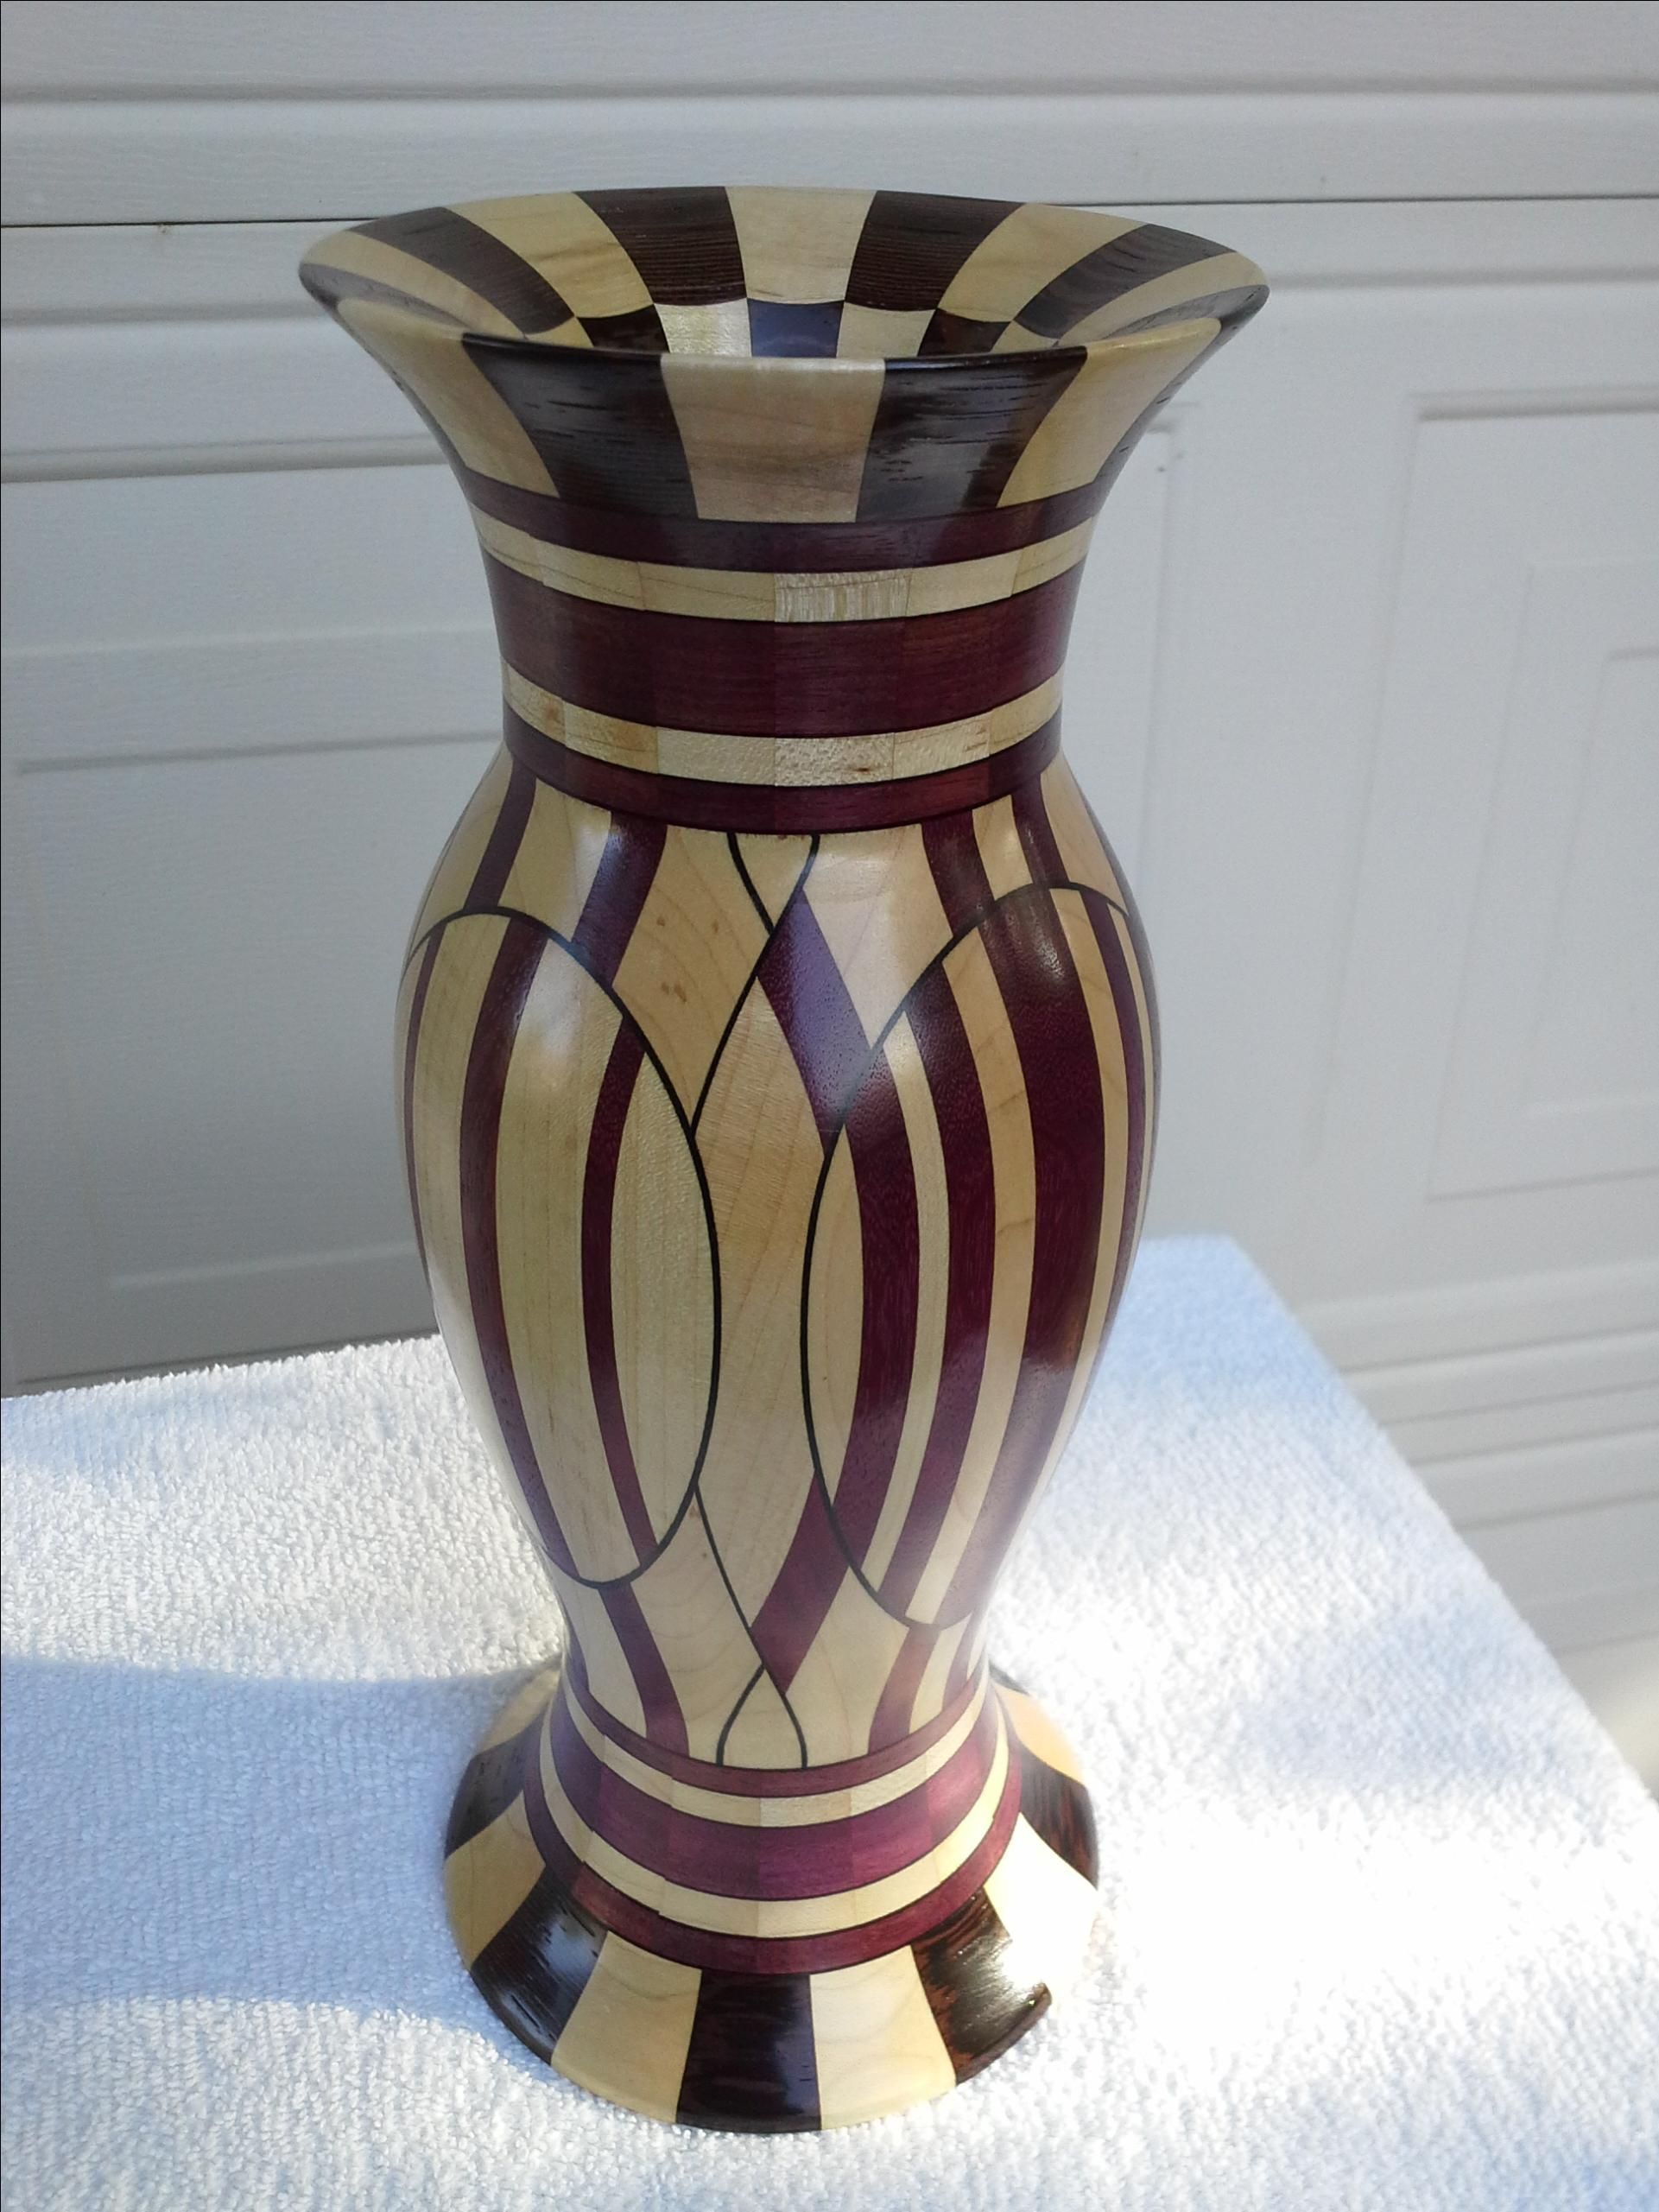 Buy a Hand Made Woodturned Vase, made to order from RB Wood Designs